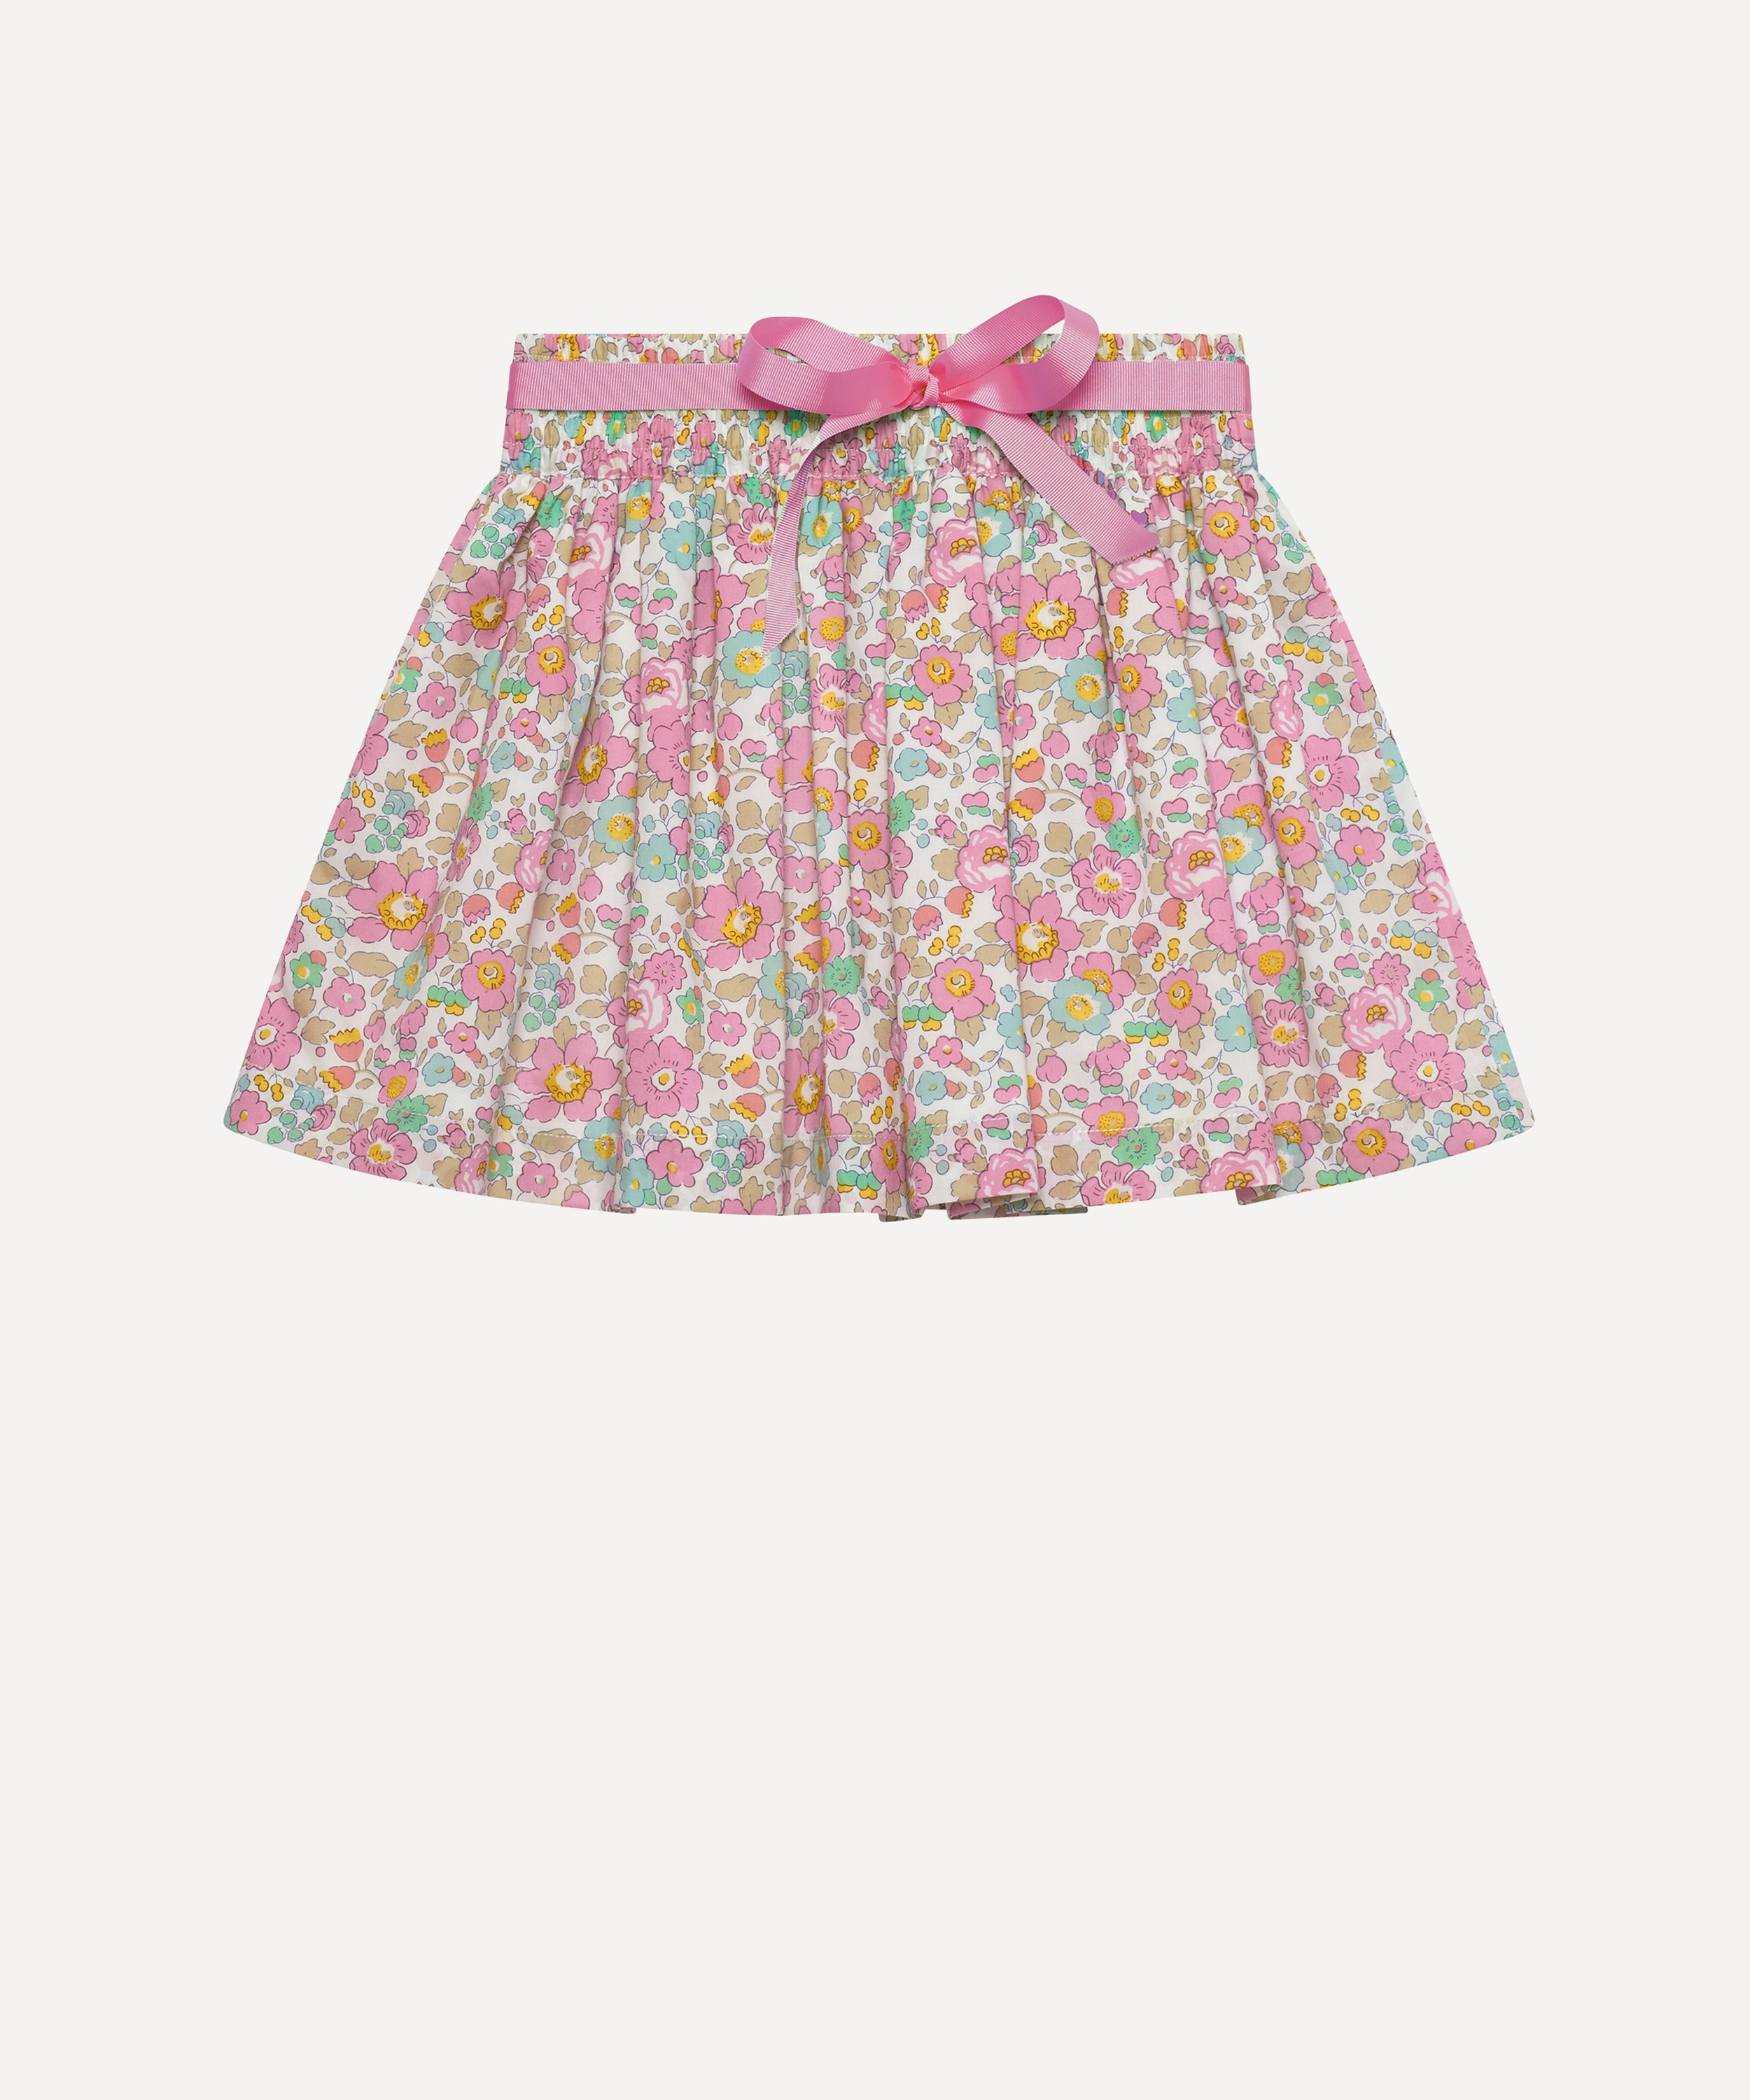 Trotters - Betsy Bow Skirt 2-7 Years